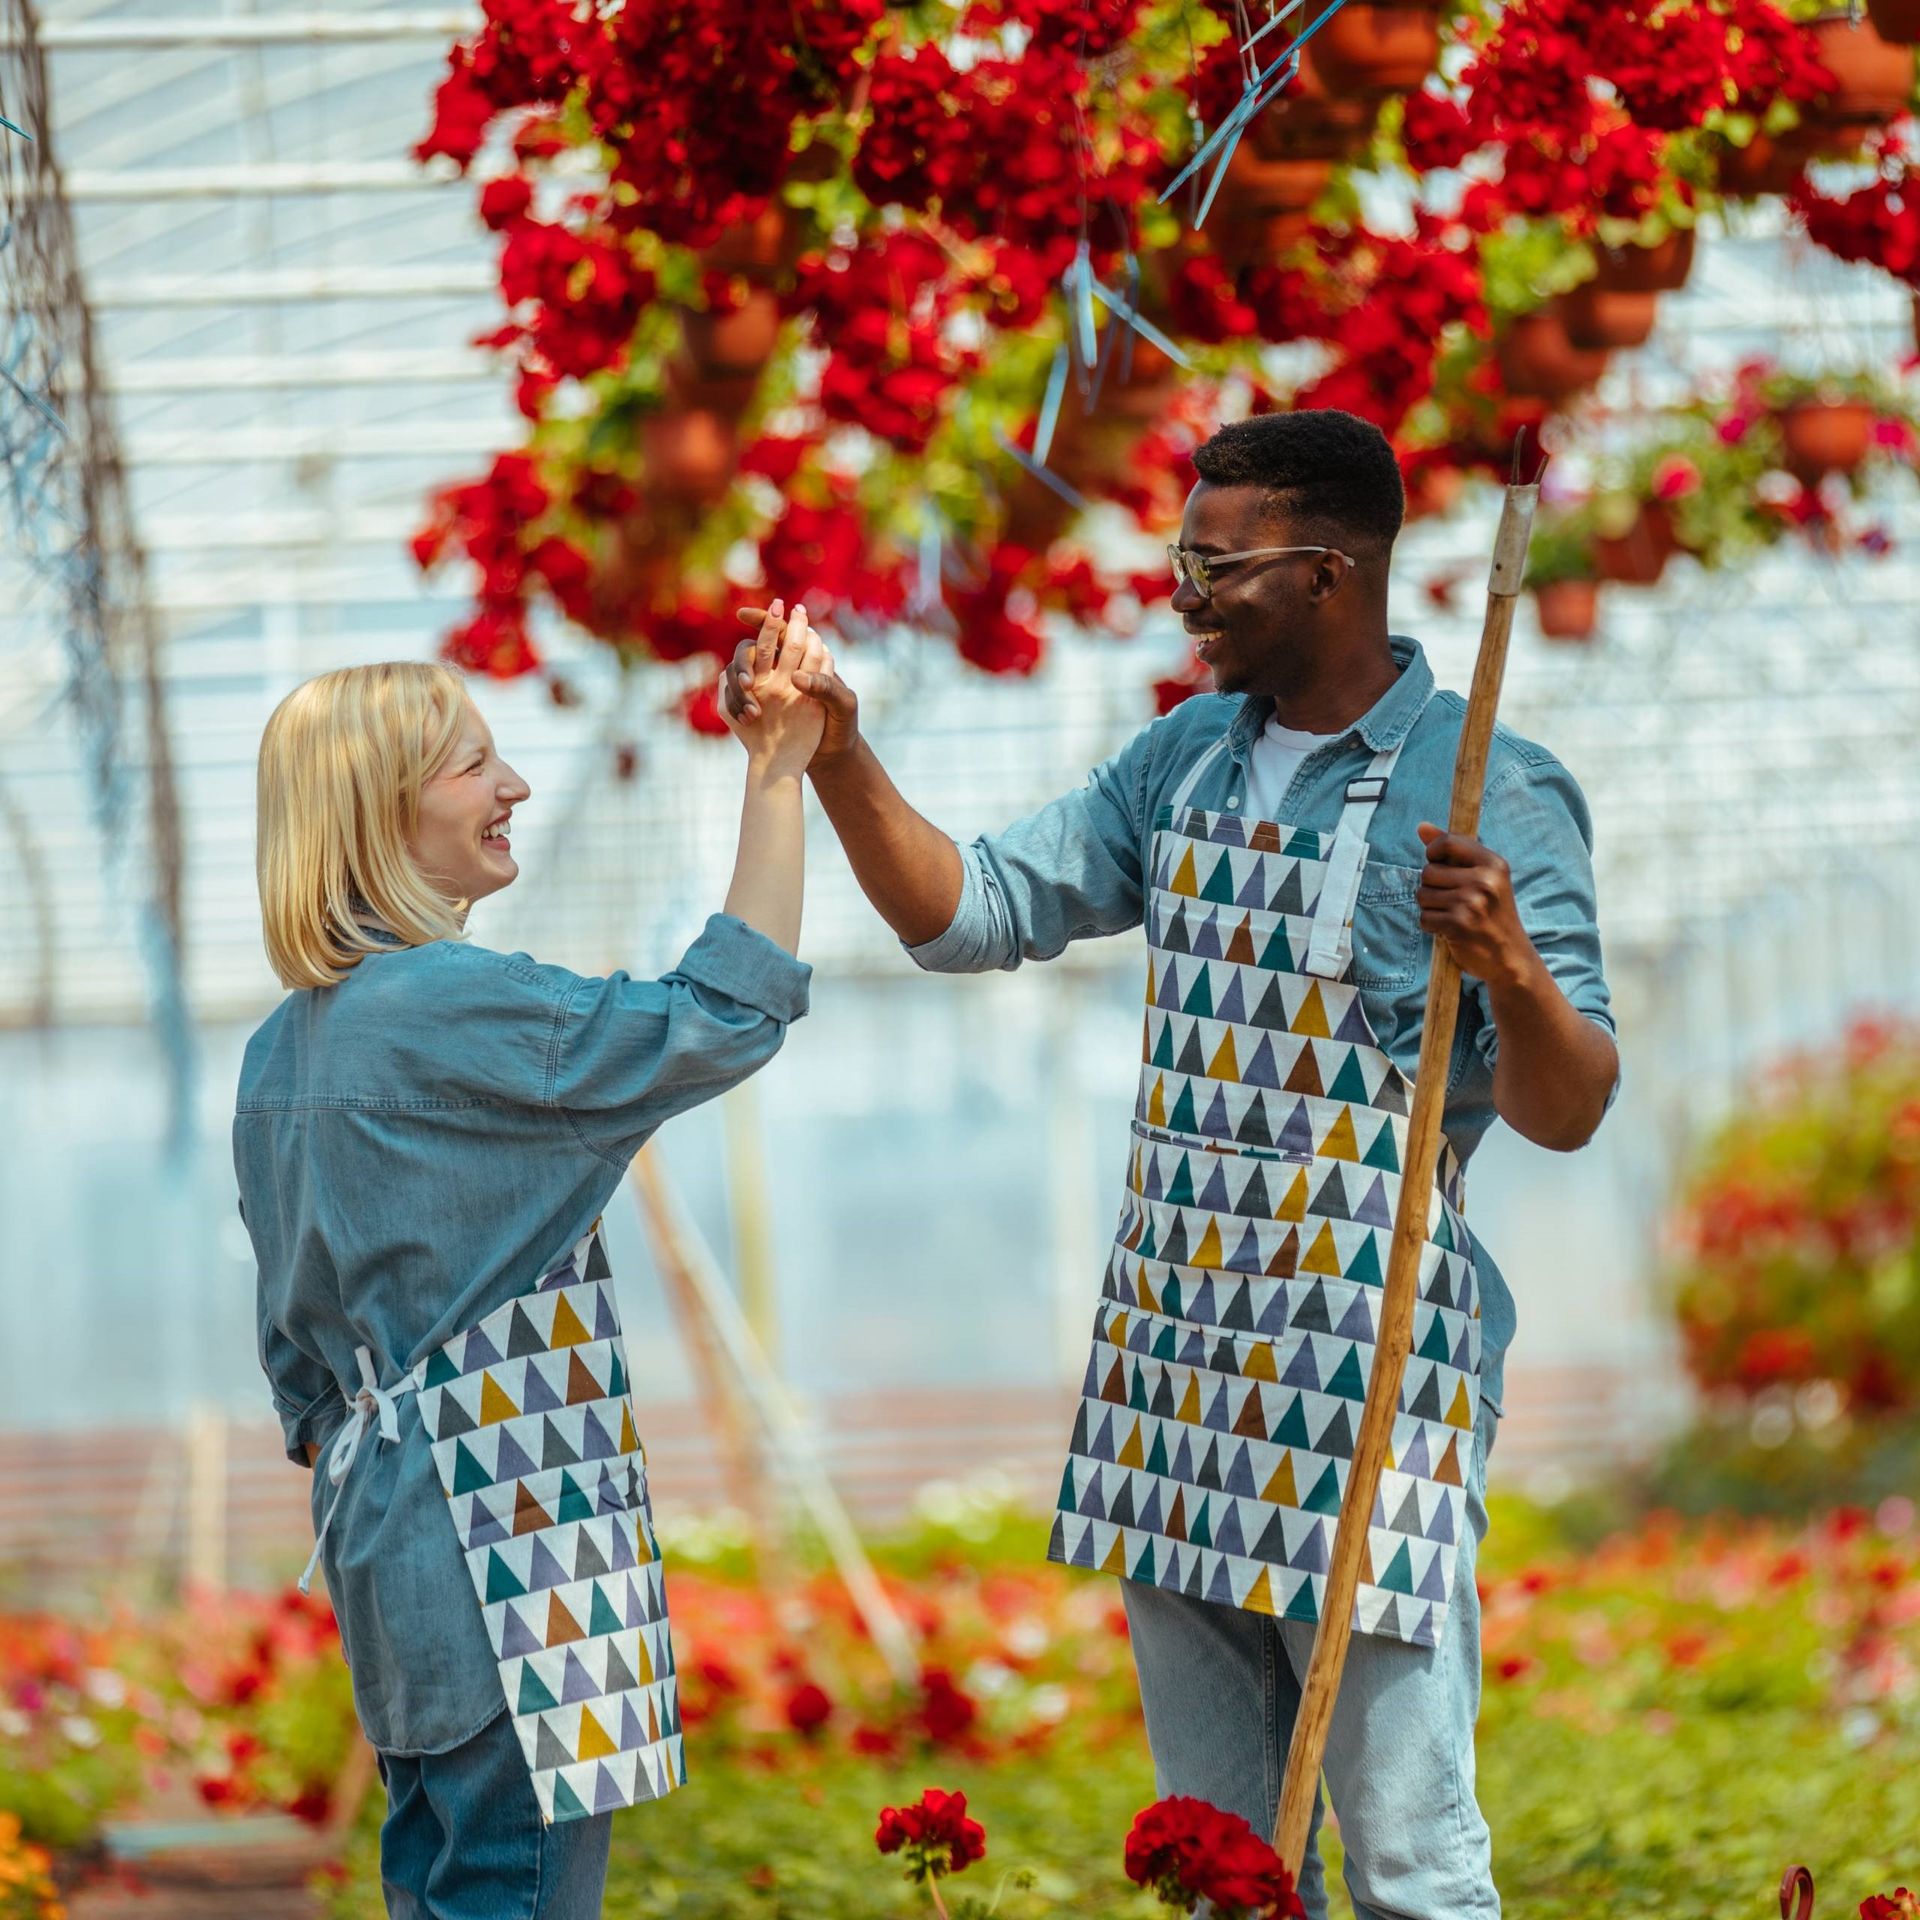 Image of two agricultural workers in a greenhouse